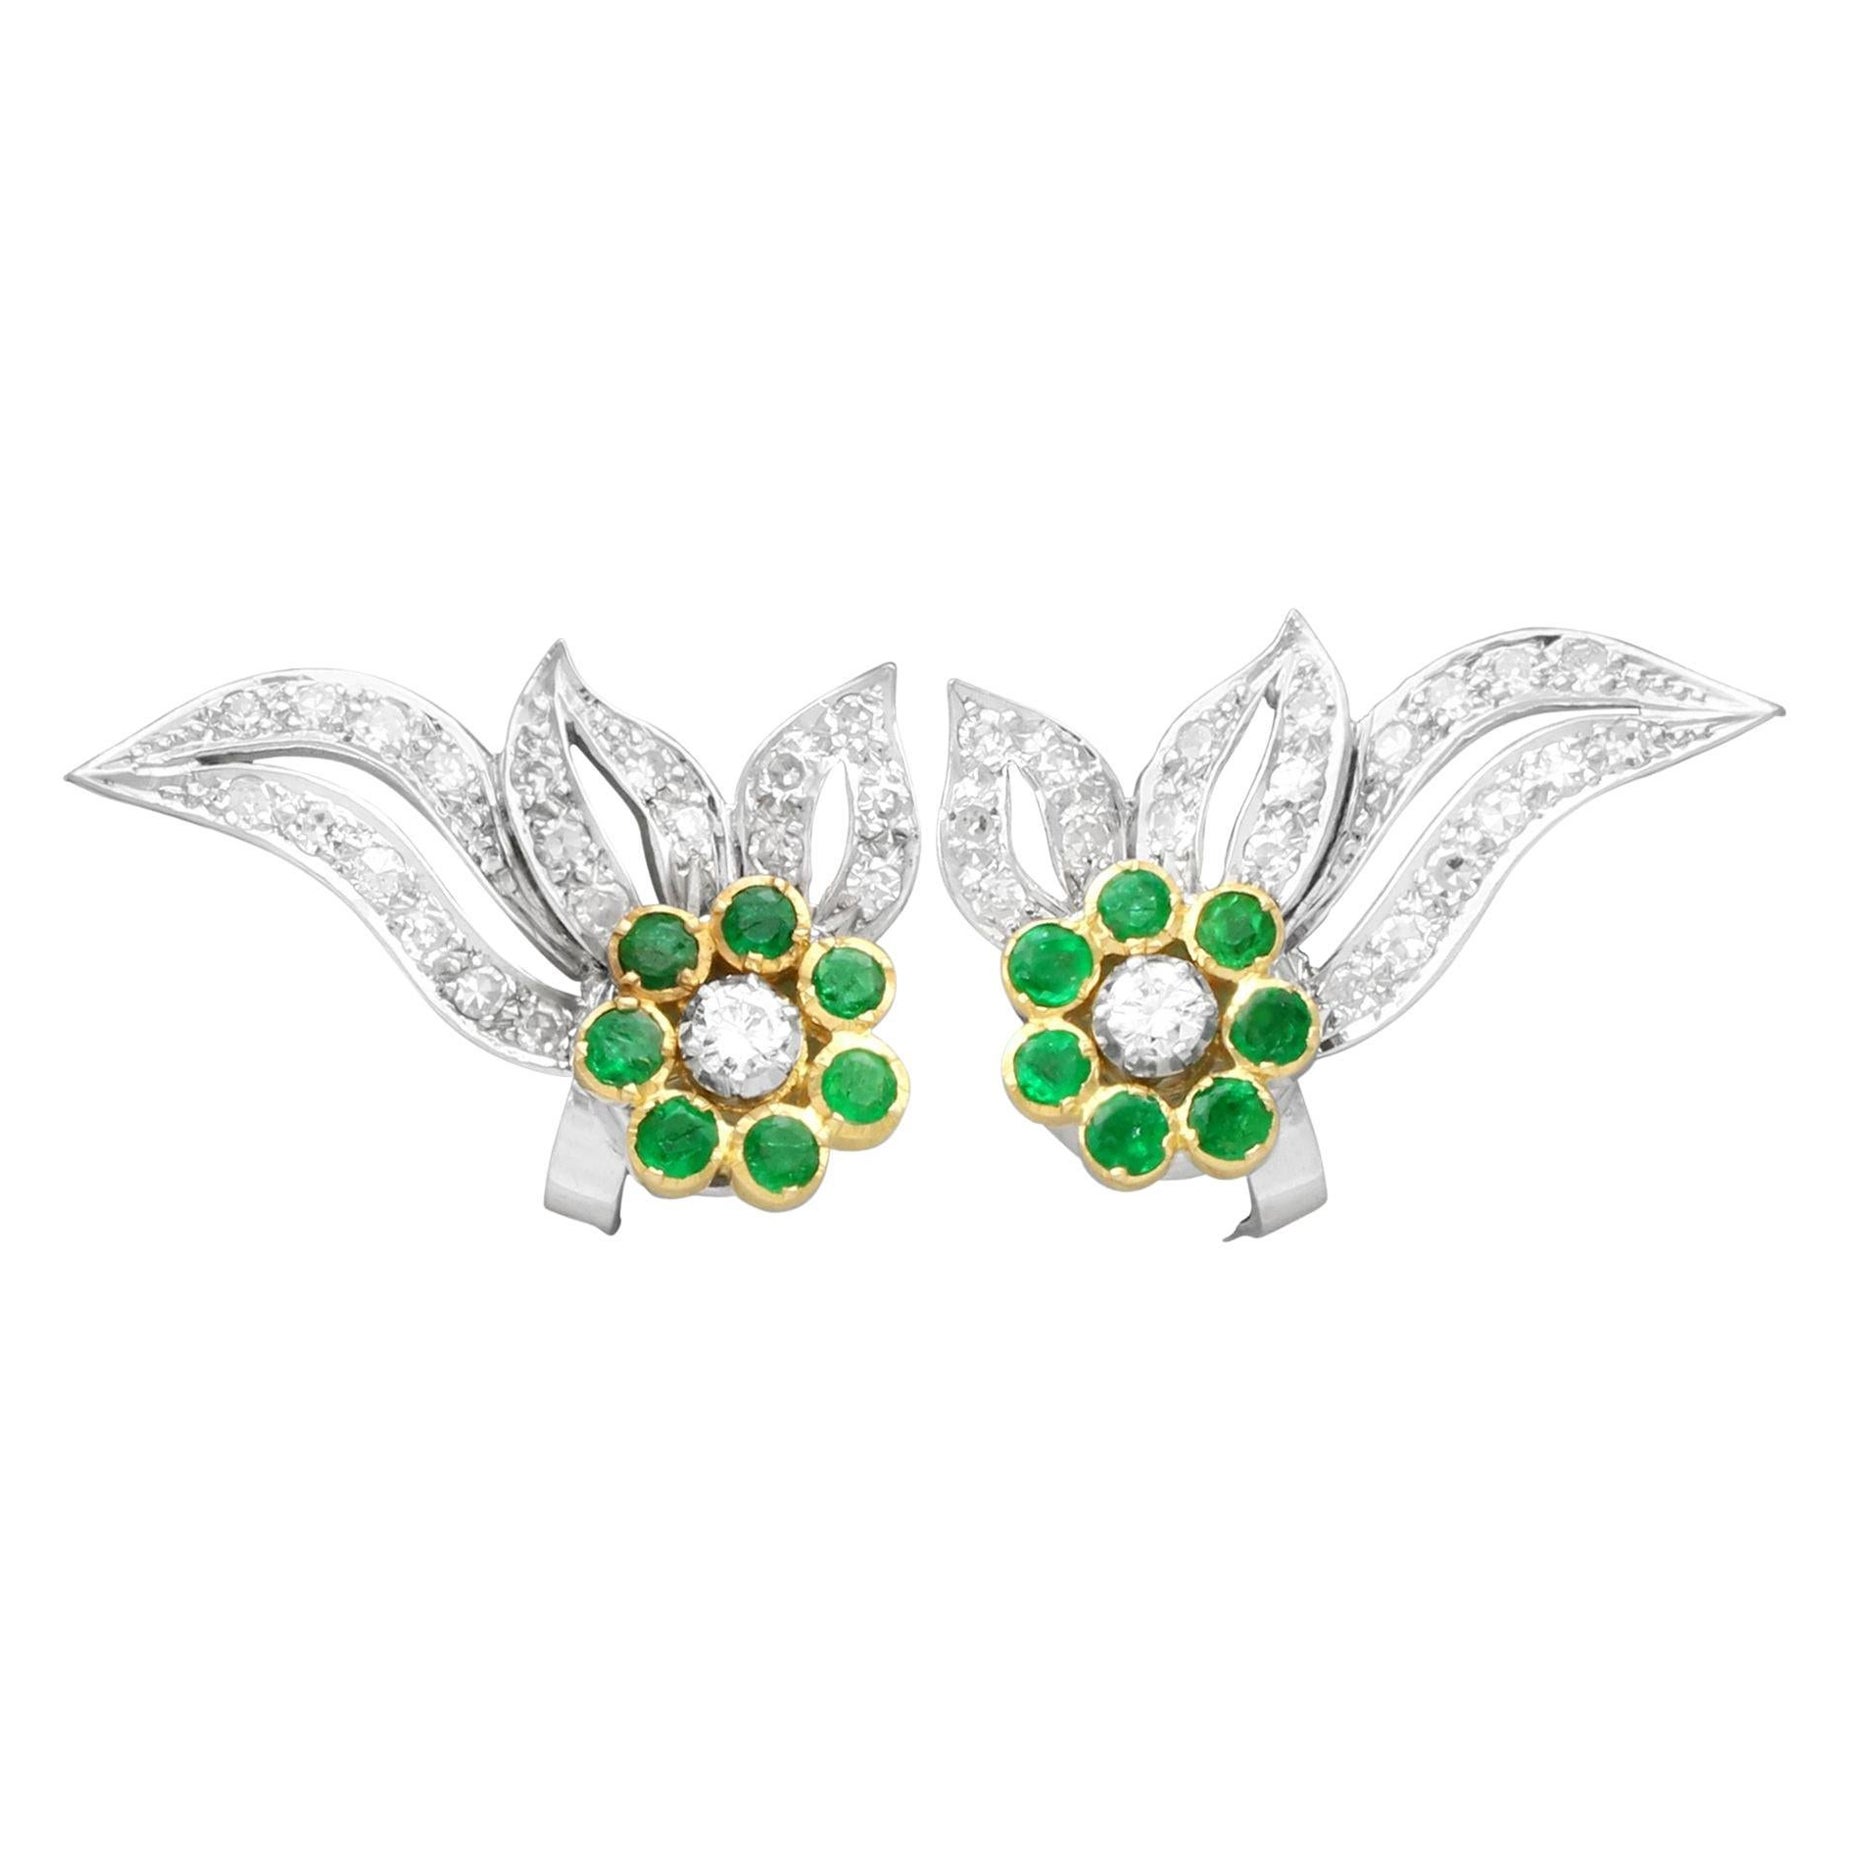 Vintage Emerald and 1.35 Carat Diamond and White Gold Earrings, Circa 1950 For Sale